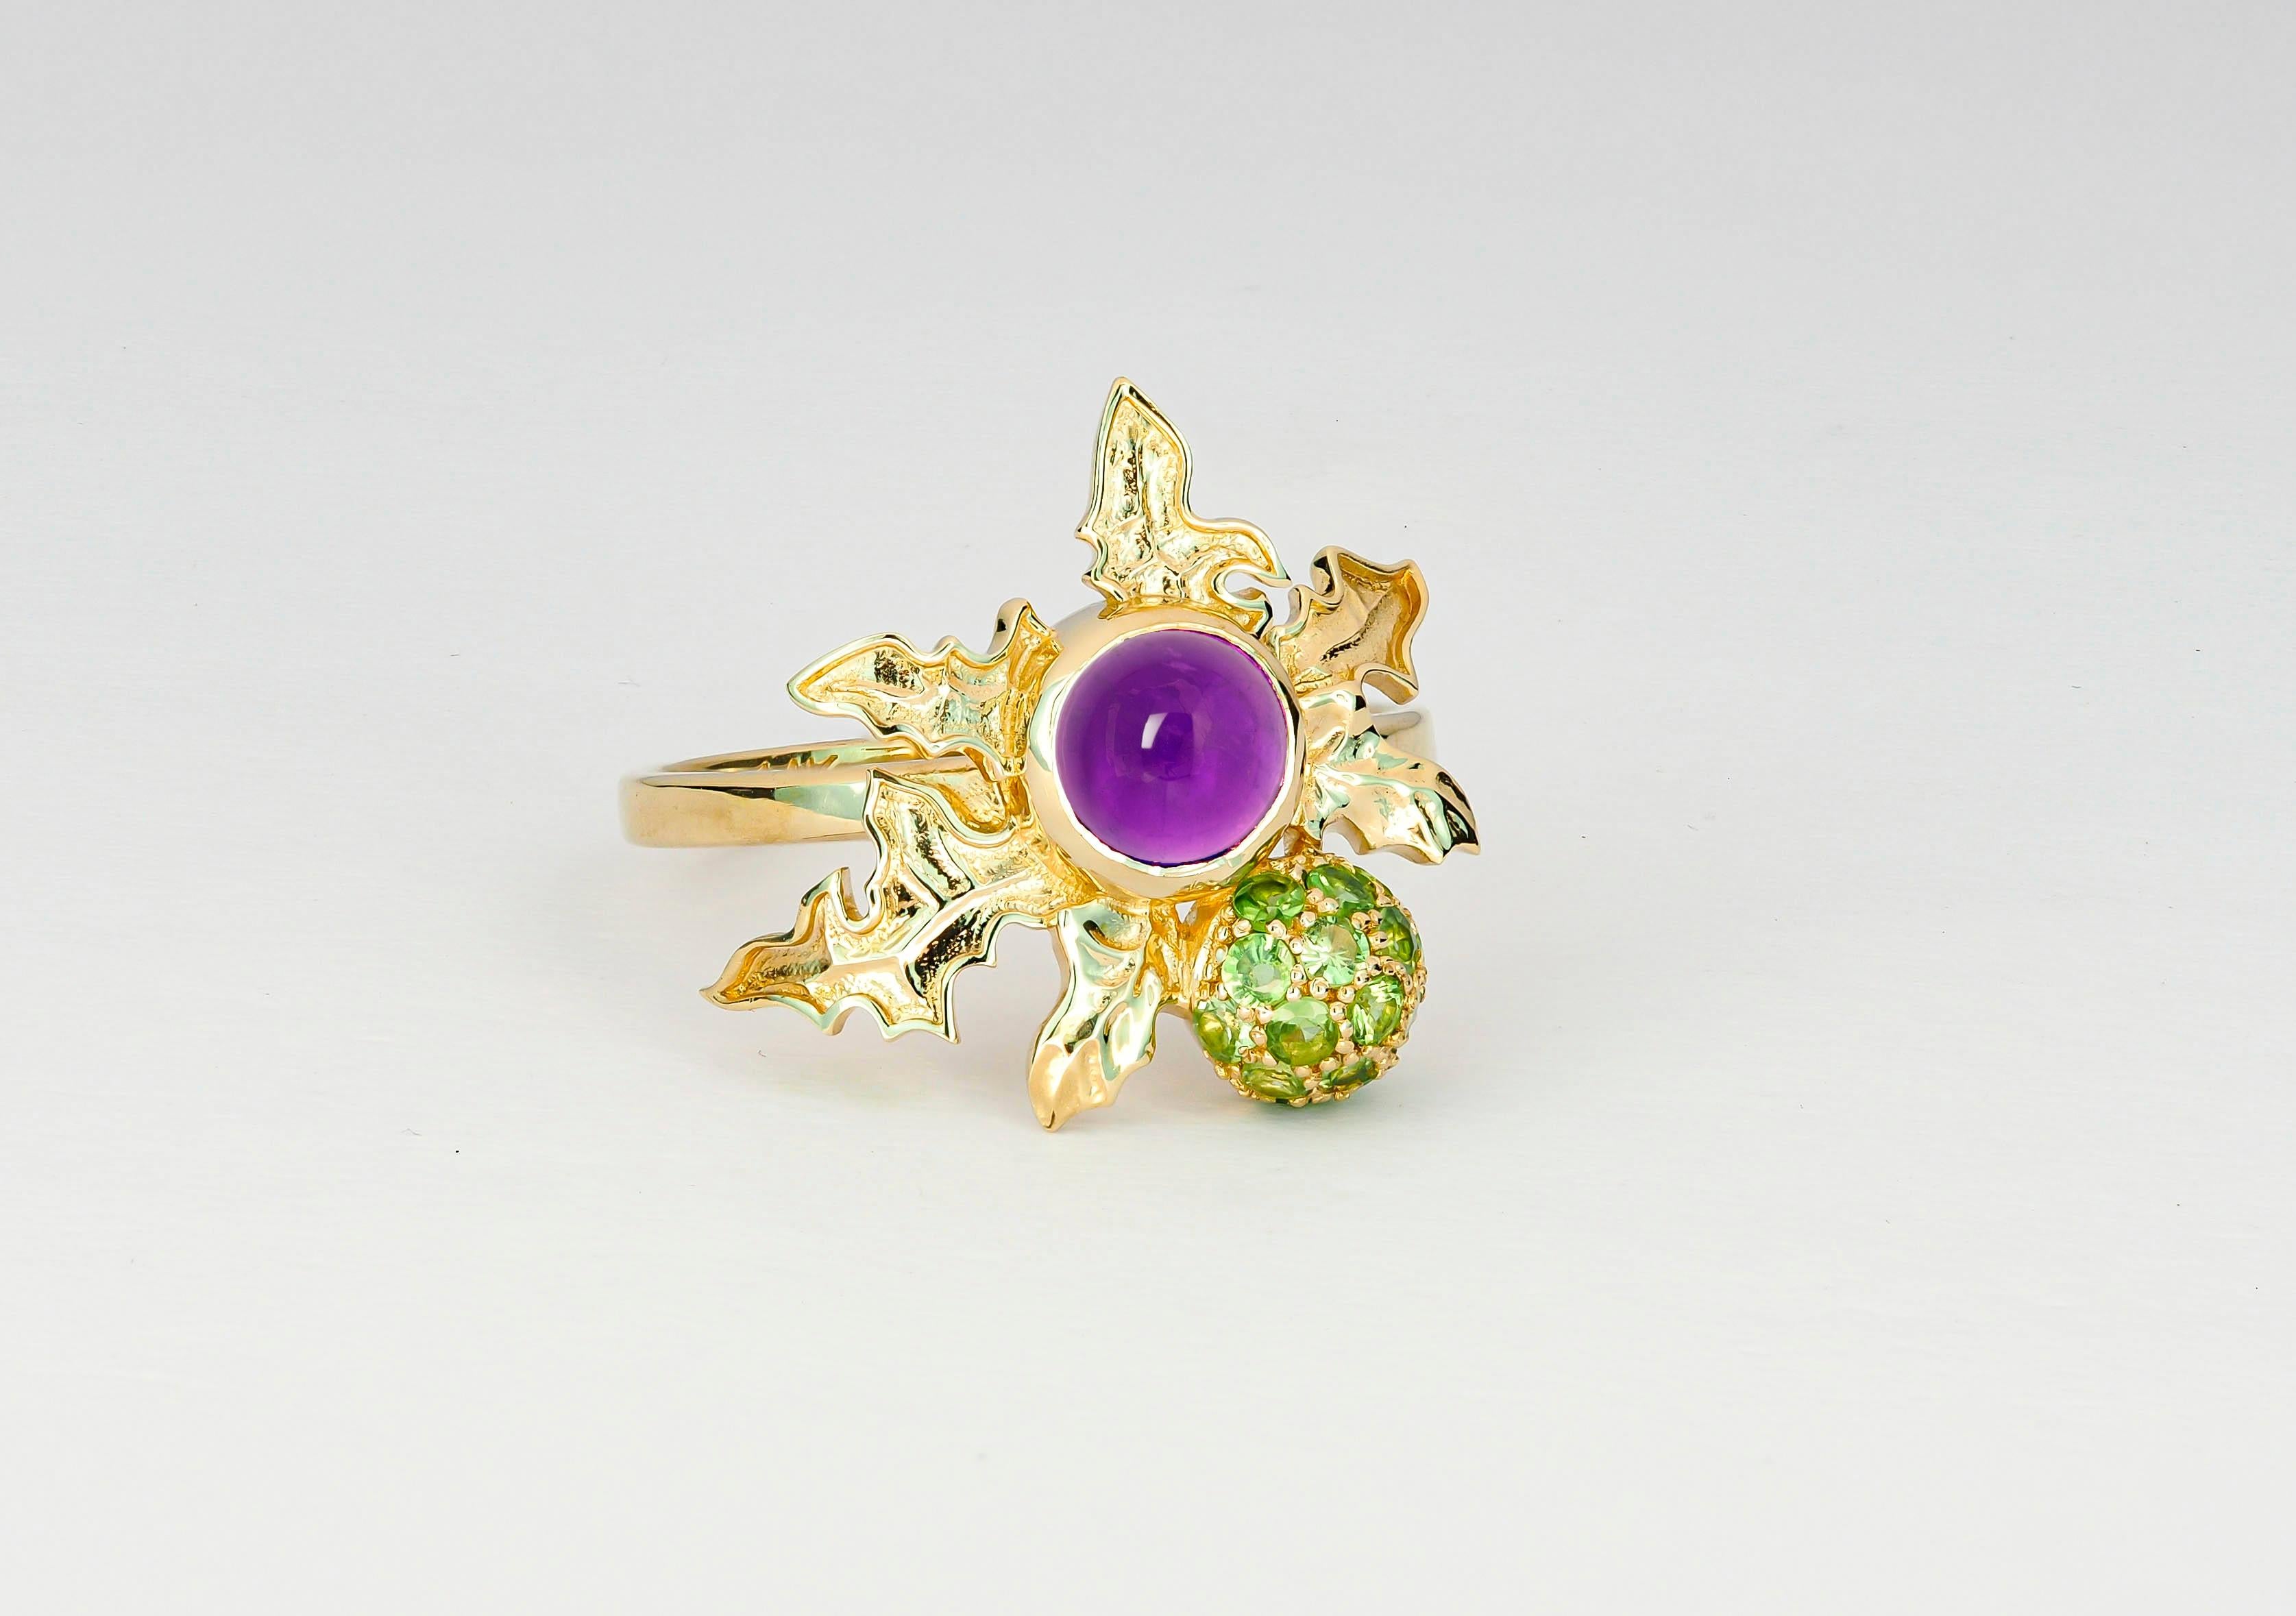 Cabochon Thistle ring with amethyst in 14k gold.  For Sale